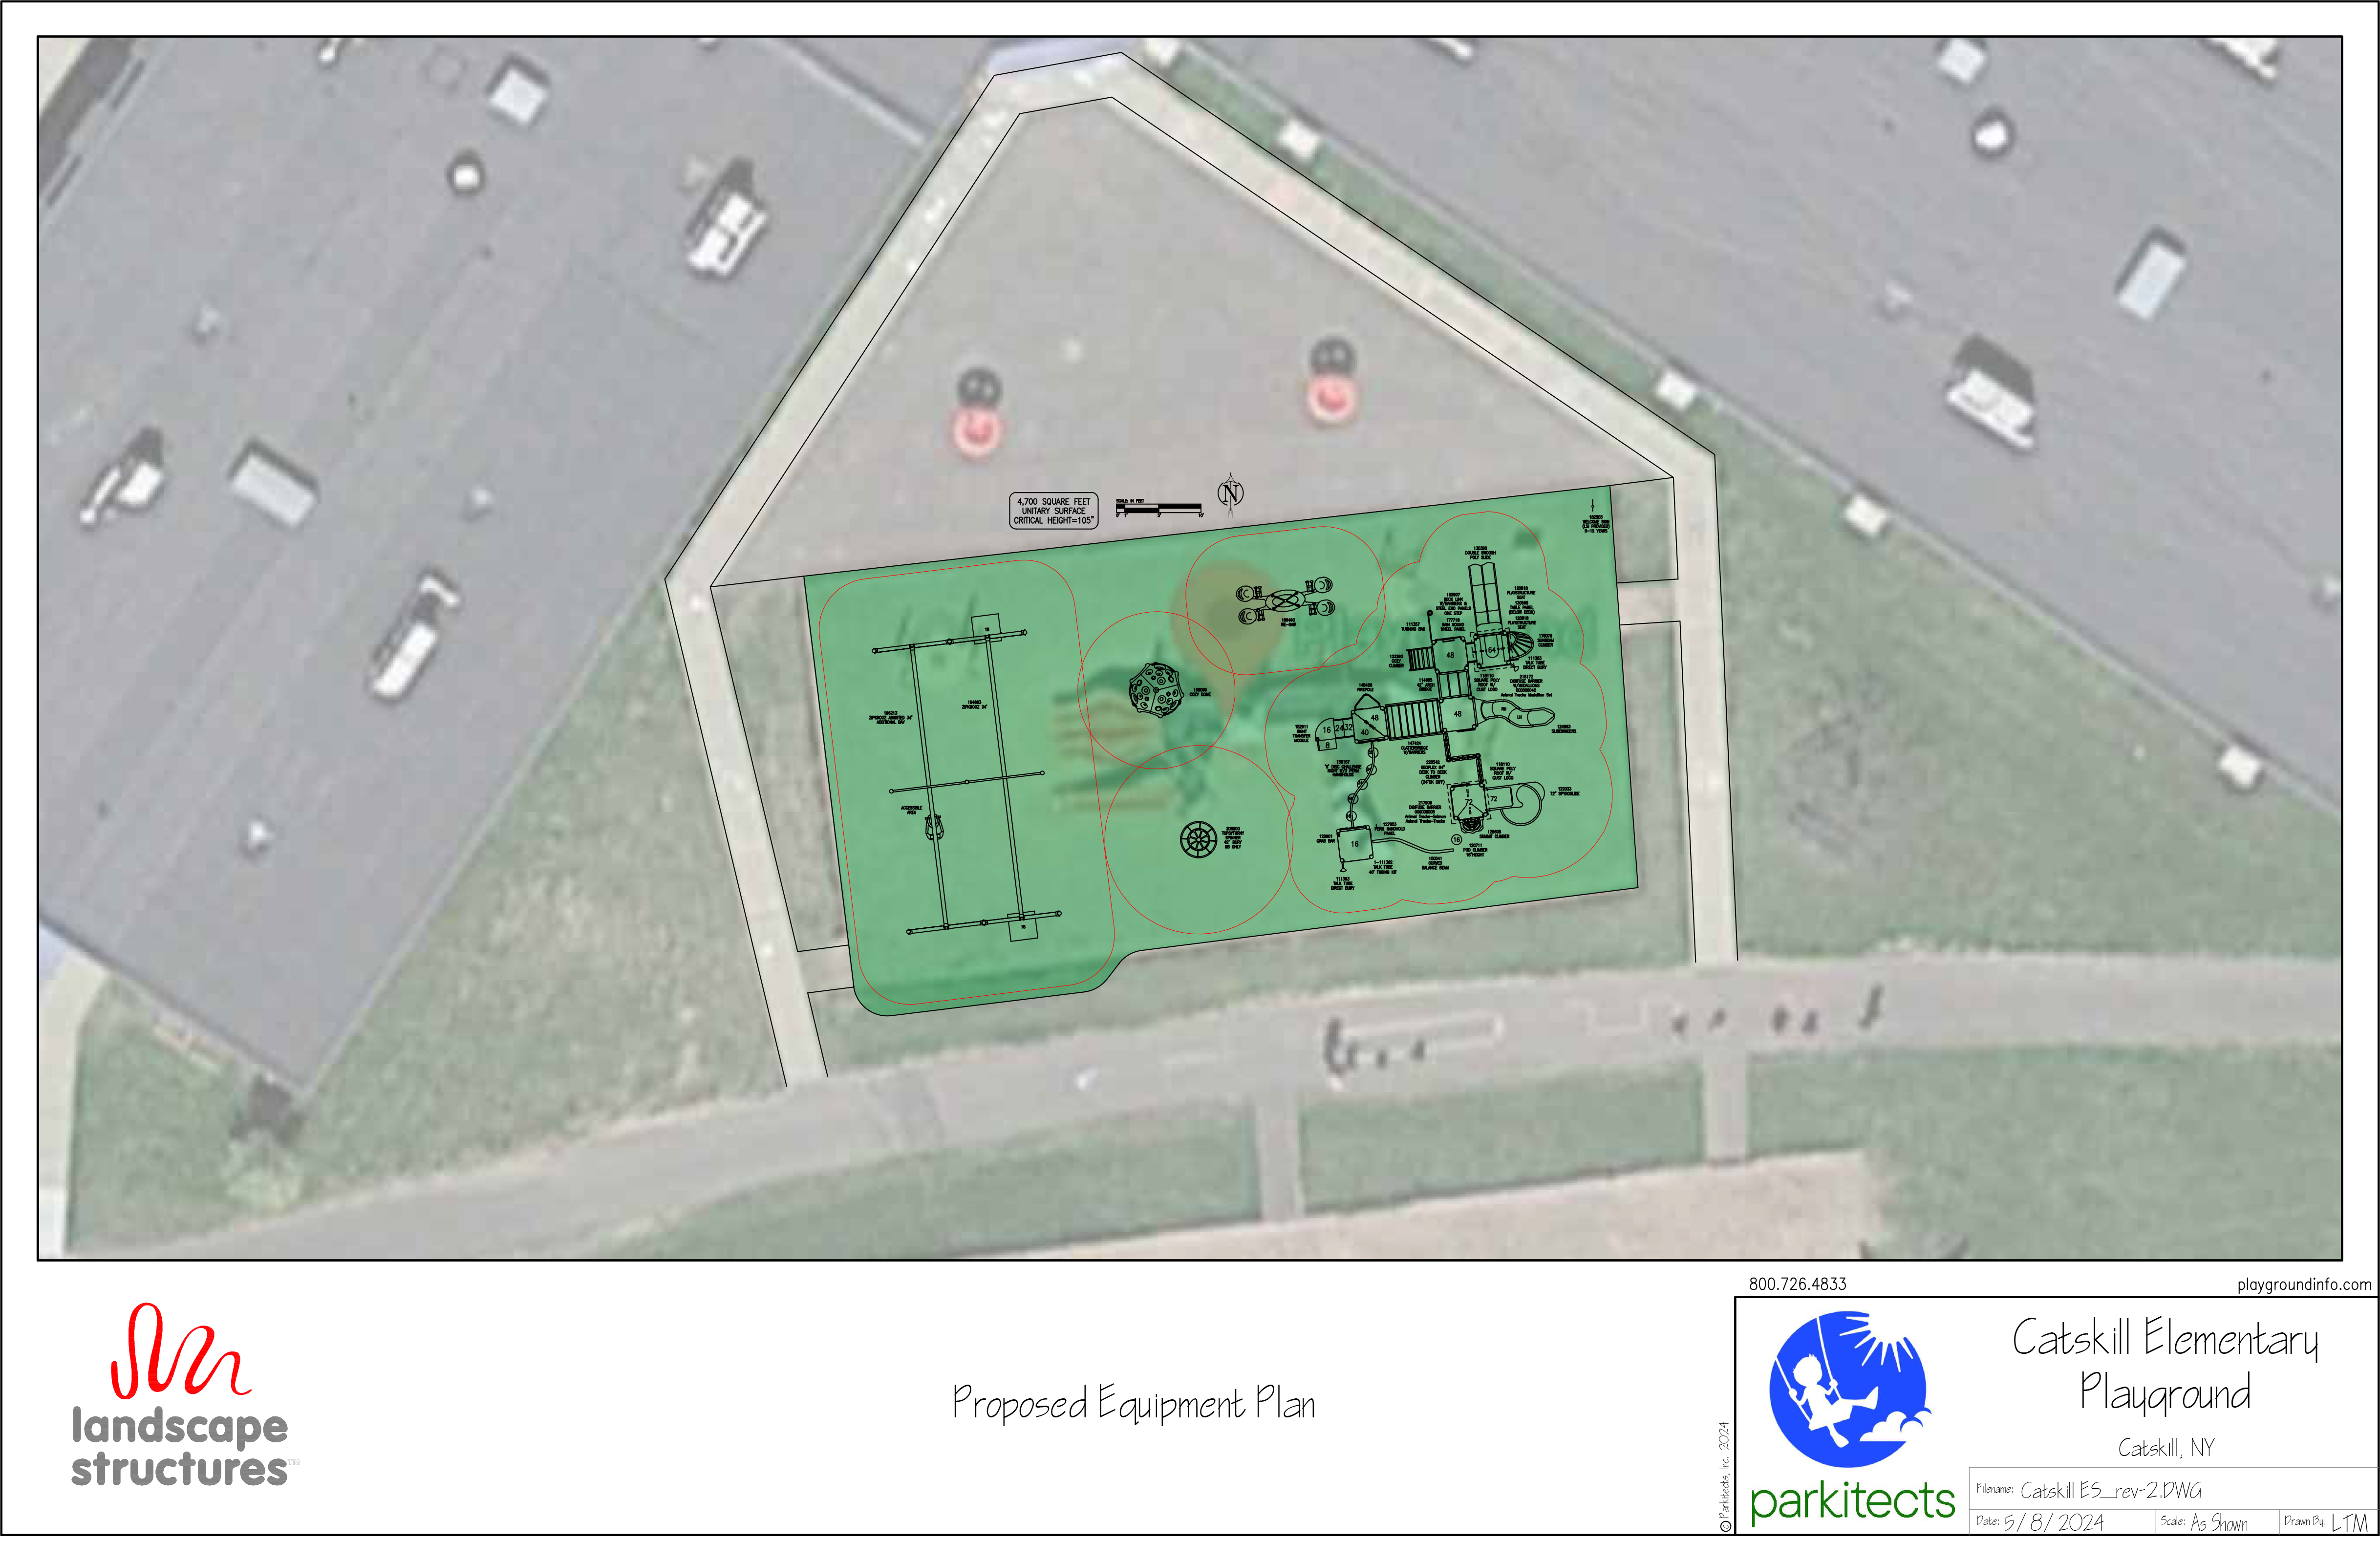 overview of playground equipment plan